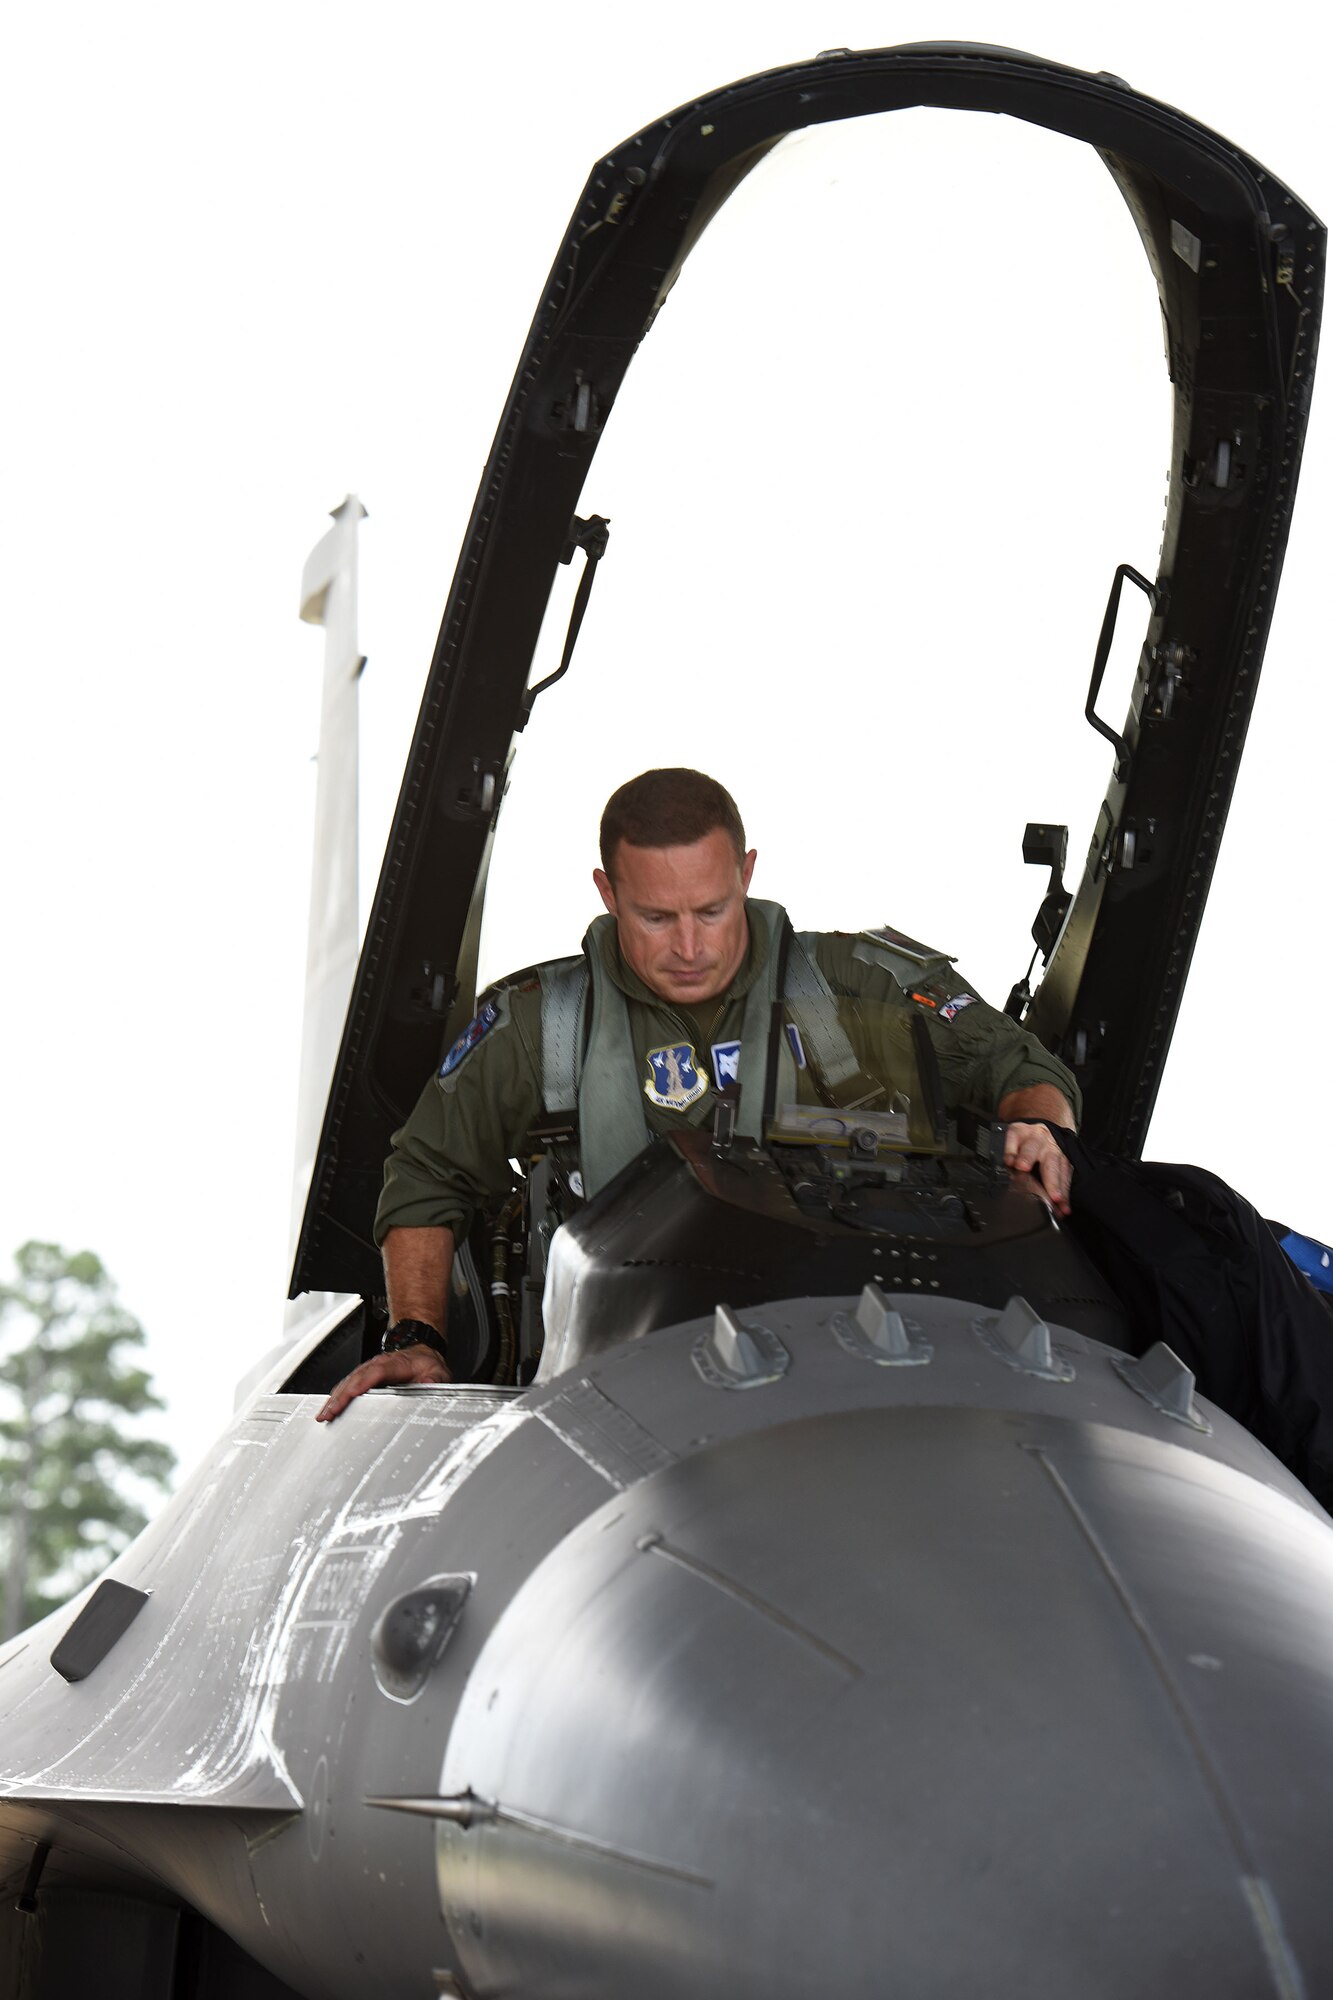 U.S. Air Force Maj. Justin Dumais, a pilot from the 169th Fighter Wing, enters the cockpit of his F-16C in preparation for an Aerospace Control Alert training mission, June 5, during the Southeast Aerospace Control Alert Conference at McEntire Joint National Guard Base, S.C. June 5-7. The 169th Fighter Wing hosted the conference in close coordination with the Continental U.S. North American Aerospace Defense Command Region, the Eastern Air Defense Sector and the Federal Aviation Administration. The conference was a total-team training initiative to improve homeland defense capabilities by developing techniques with joint forces during small-scale exercises. This conference consisted of South Carolina Air National Guard 169th FW F-16 fighter jets, U.S. Coast Guard Rotary Wing Air Intercept Squadron MH-65D Dolphin helicopters from USCG Air Station Atlantic City and South Carolina Wing Civil Air Patrol aircraft and crews to hone their skills with tactical-level air-intercept procedures. (U.S. Air National Guard photo by Senior Master Sgt. Edward Snyder)